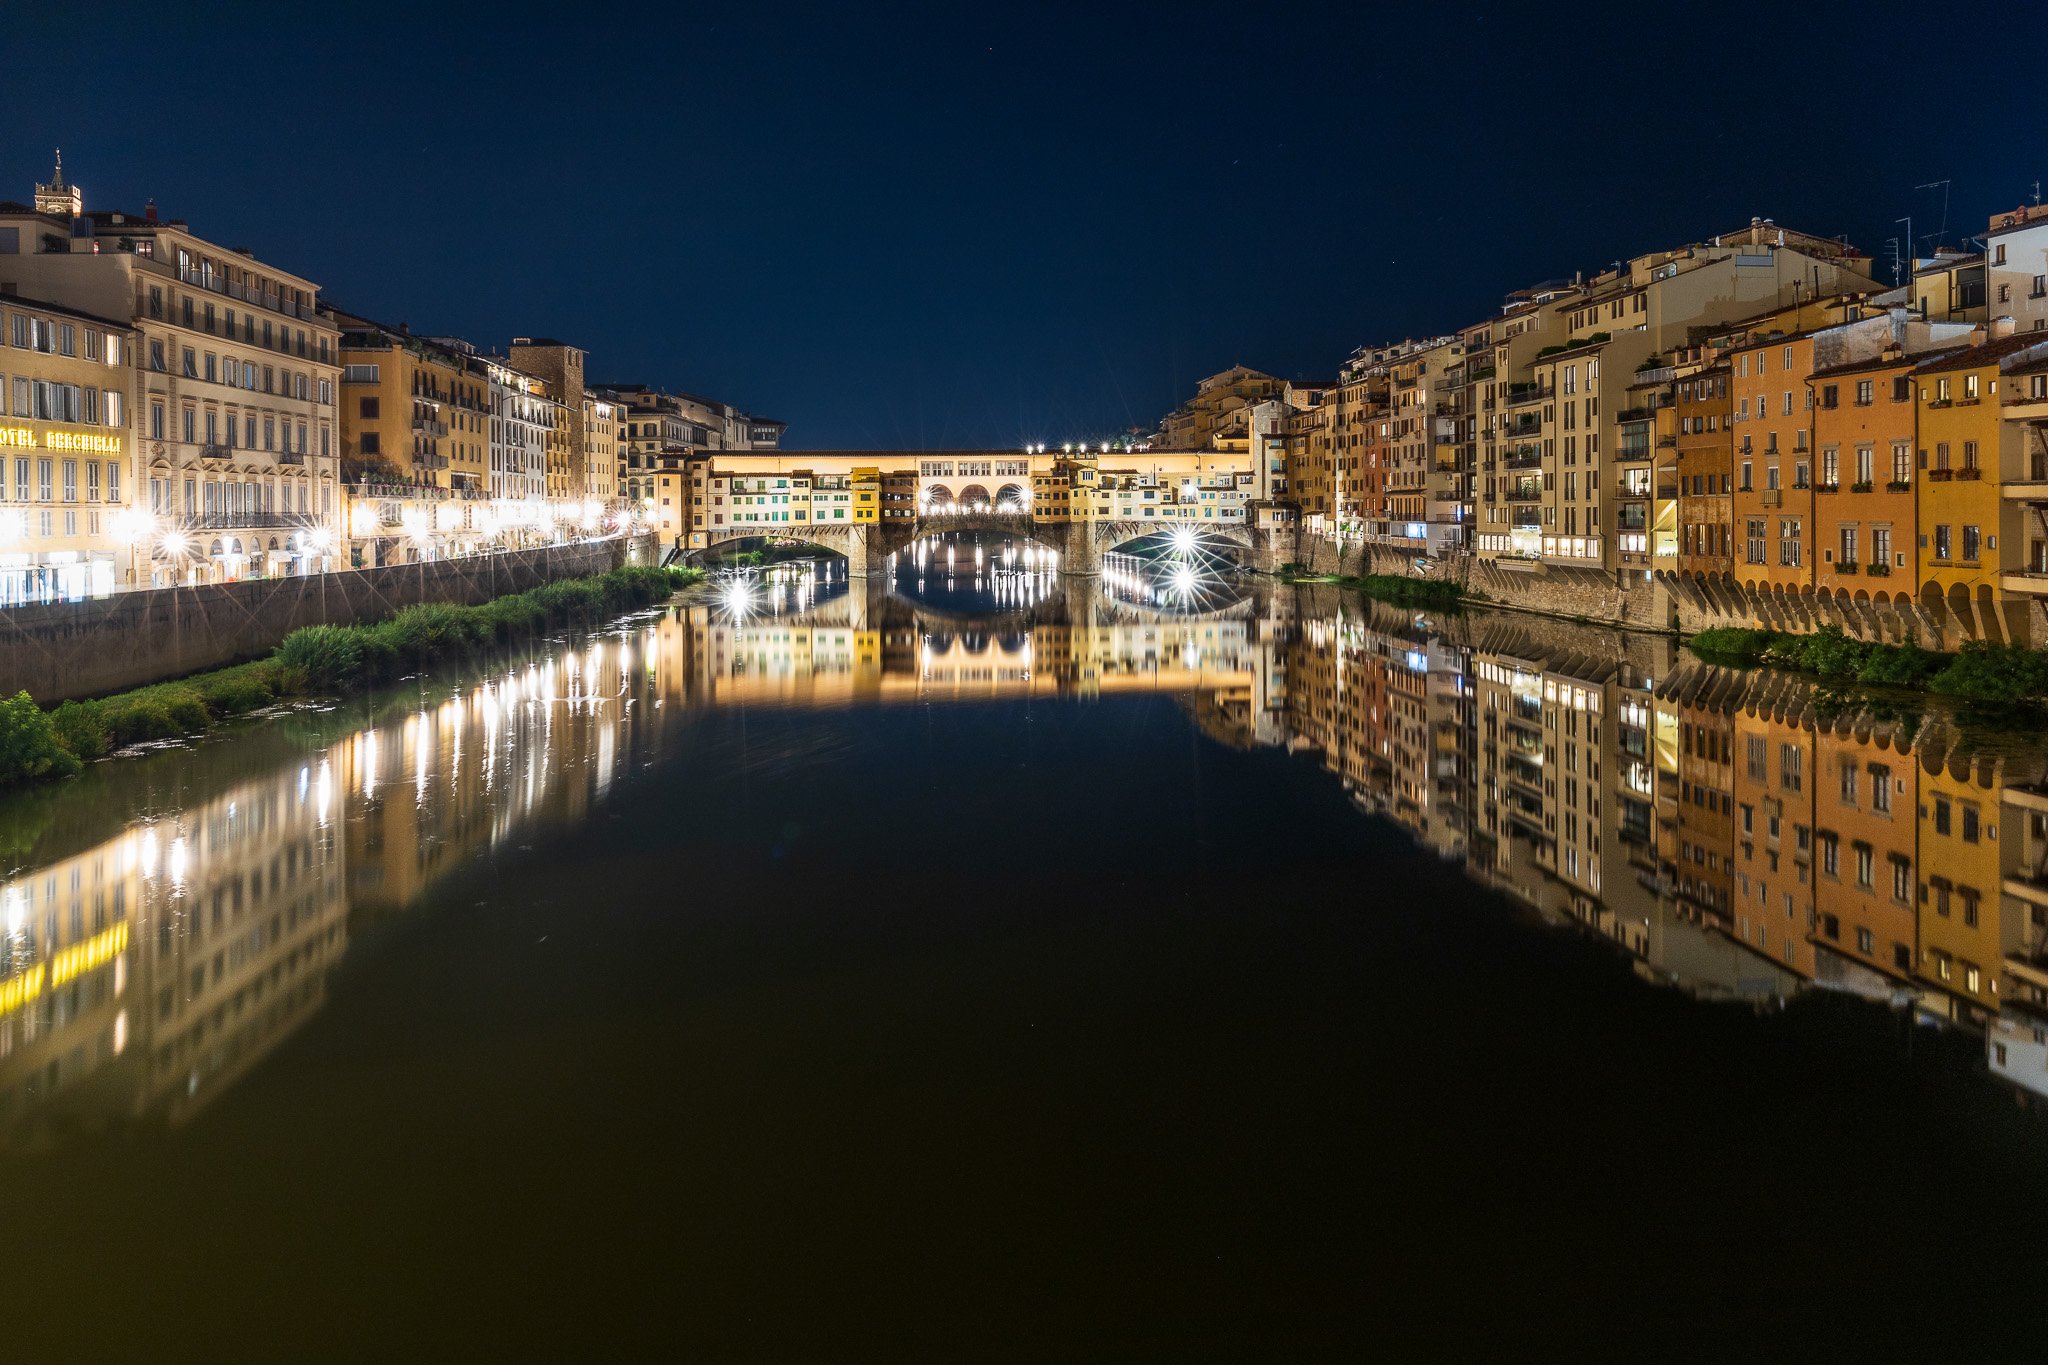 Florence, Italy-2536-July 26, 2019.jpg